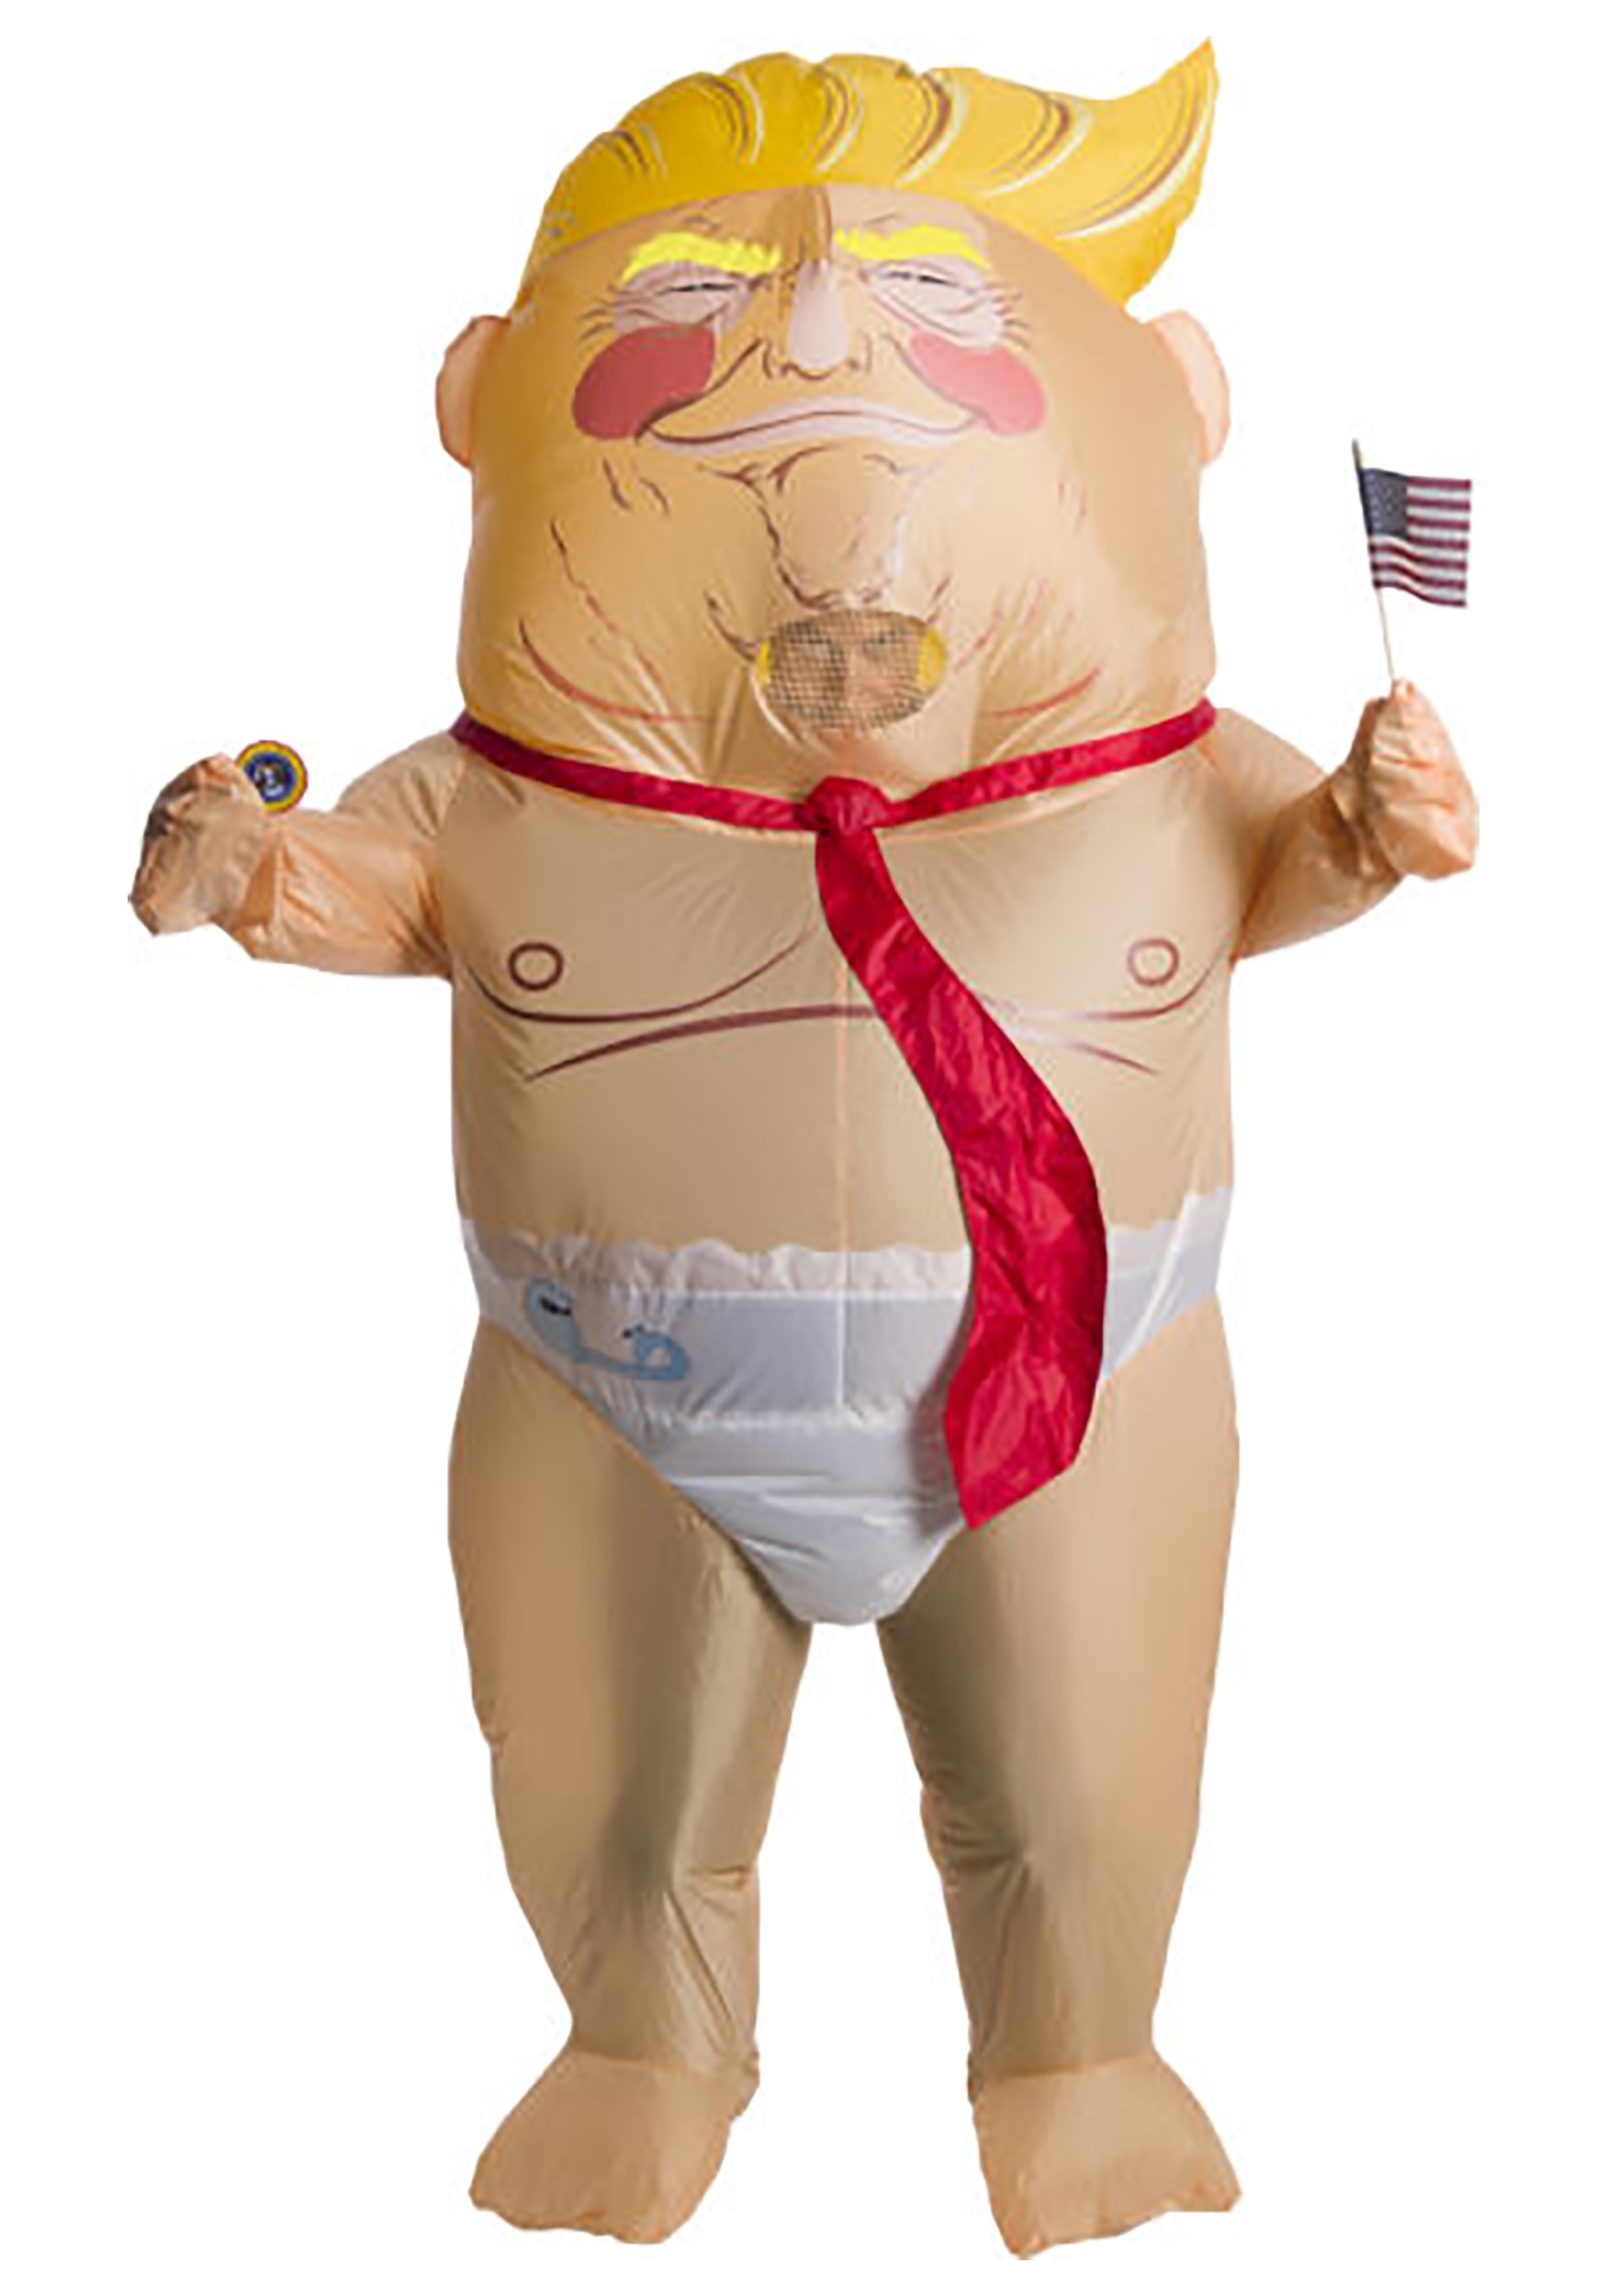 Image of Adult Inflatable Overinflated Ego Politician Halloween Costume with Sound ID RU700776-ST